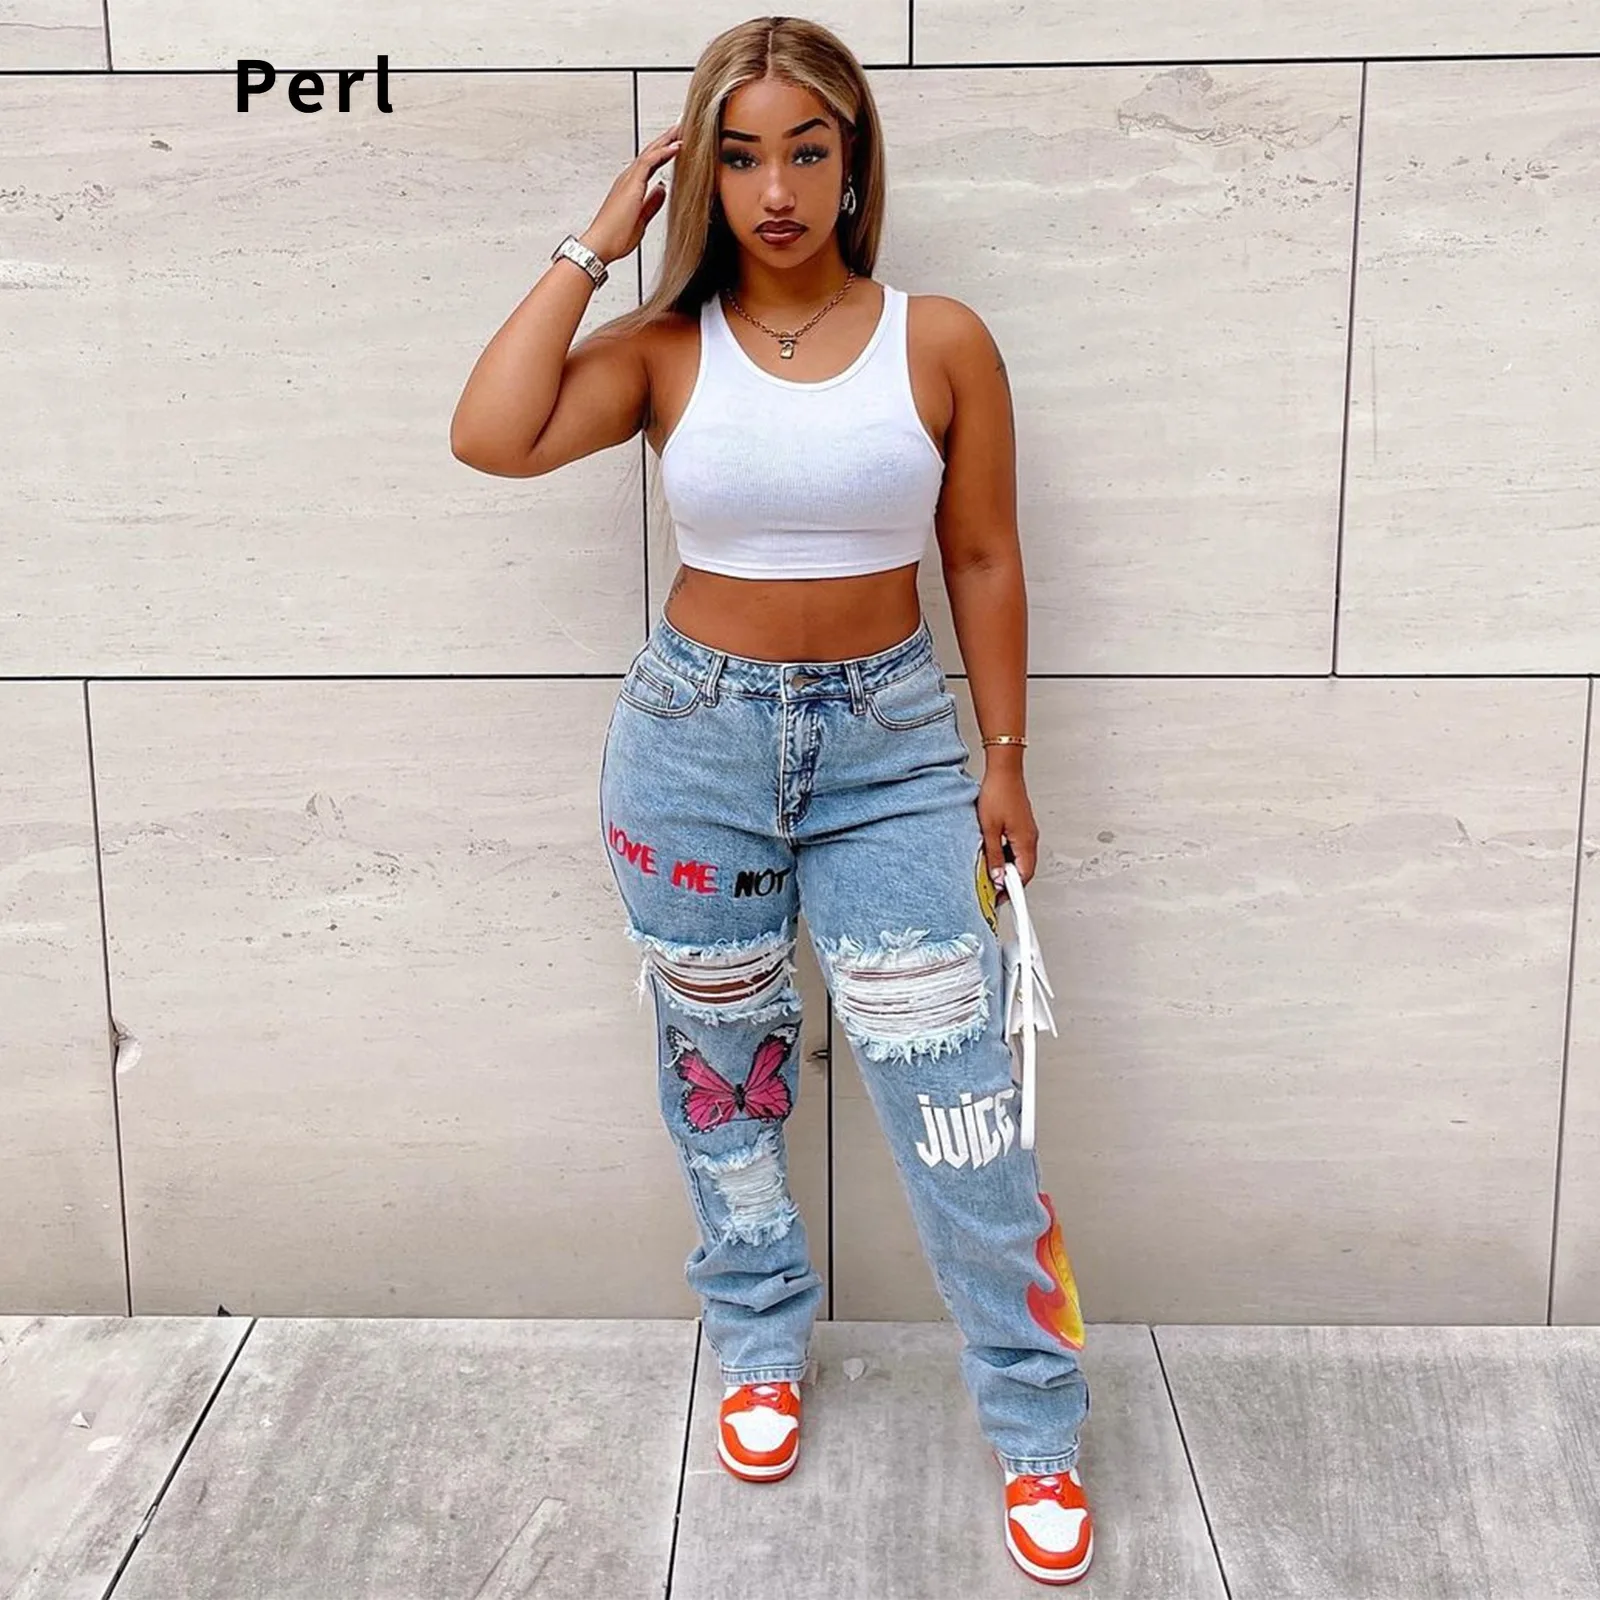 Perl Ripped Jeans for Women Vintage Streetwear Mid Waisted Denim Pants Letter Printed Trousers De Mesclilla Para Mujer